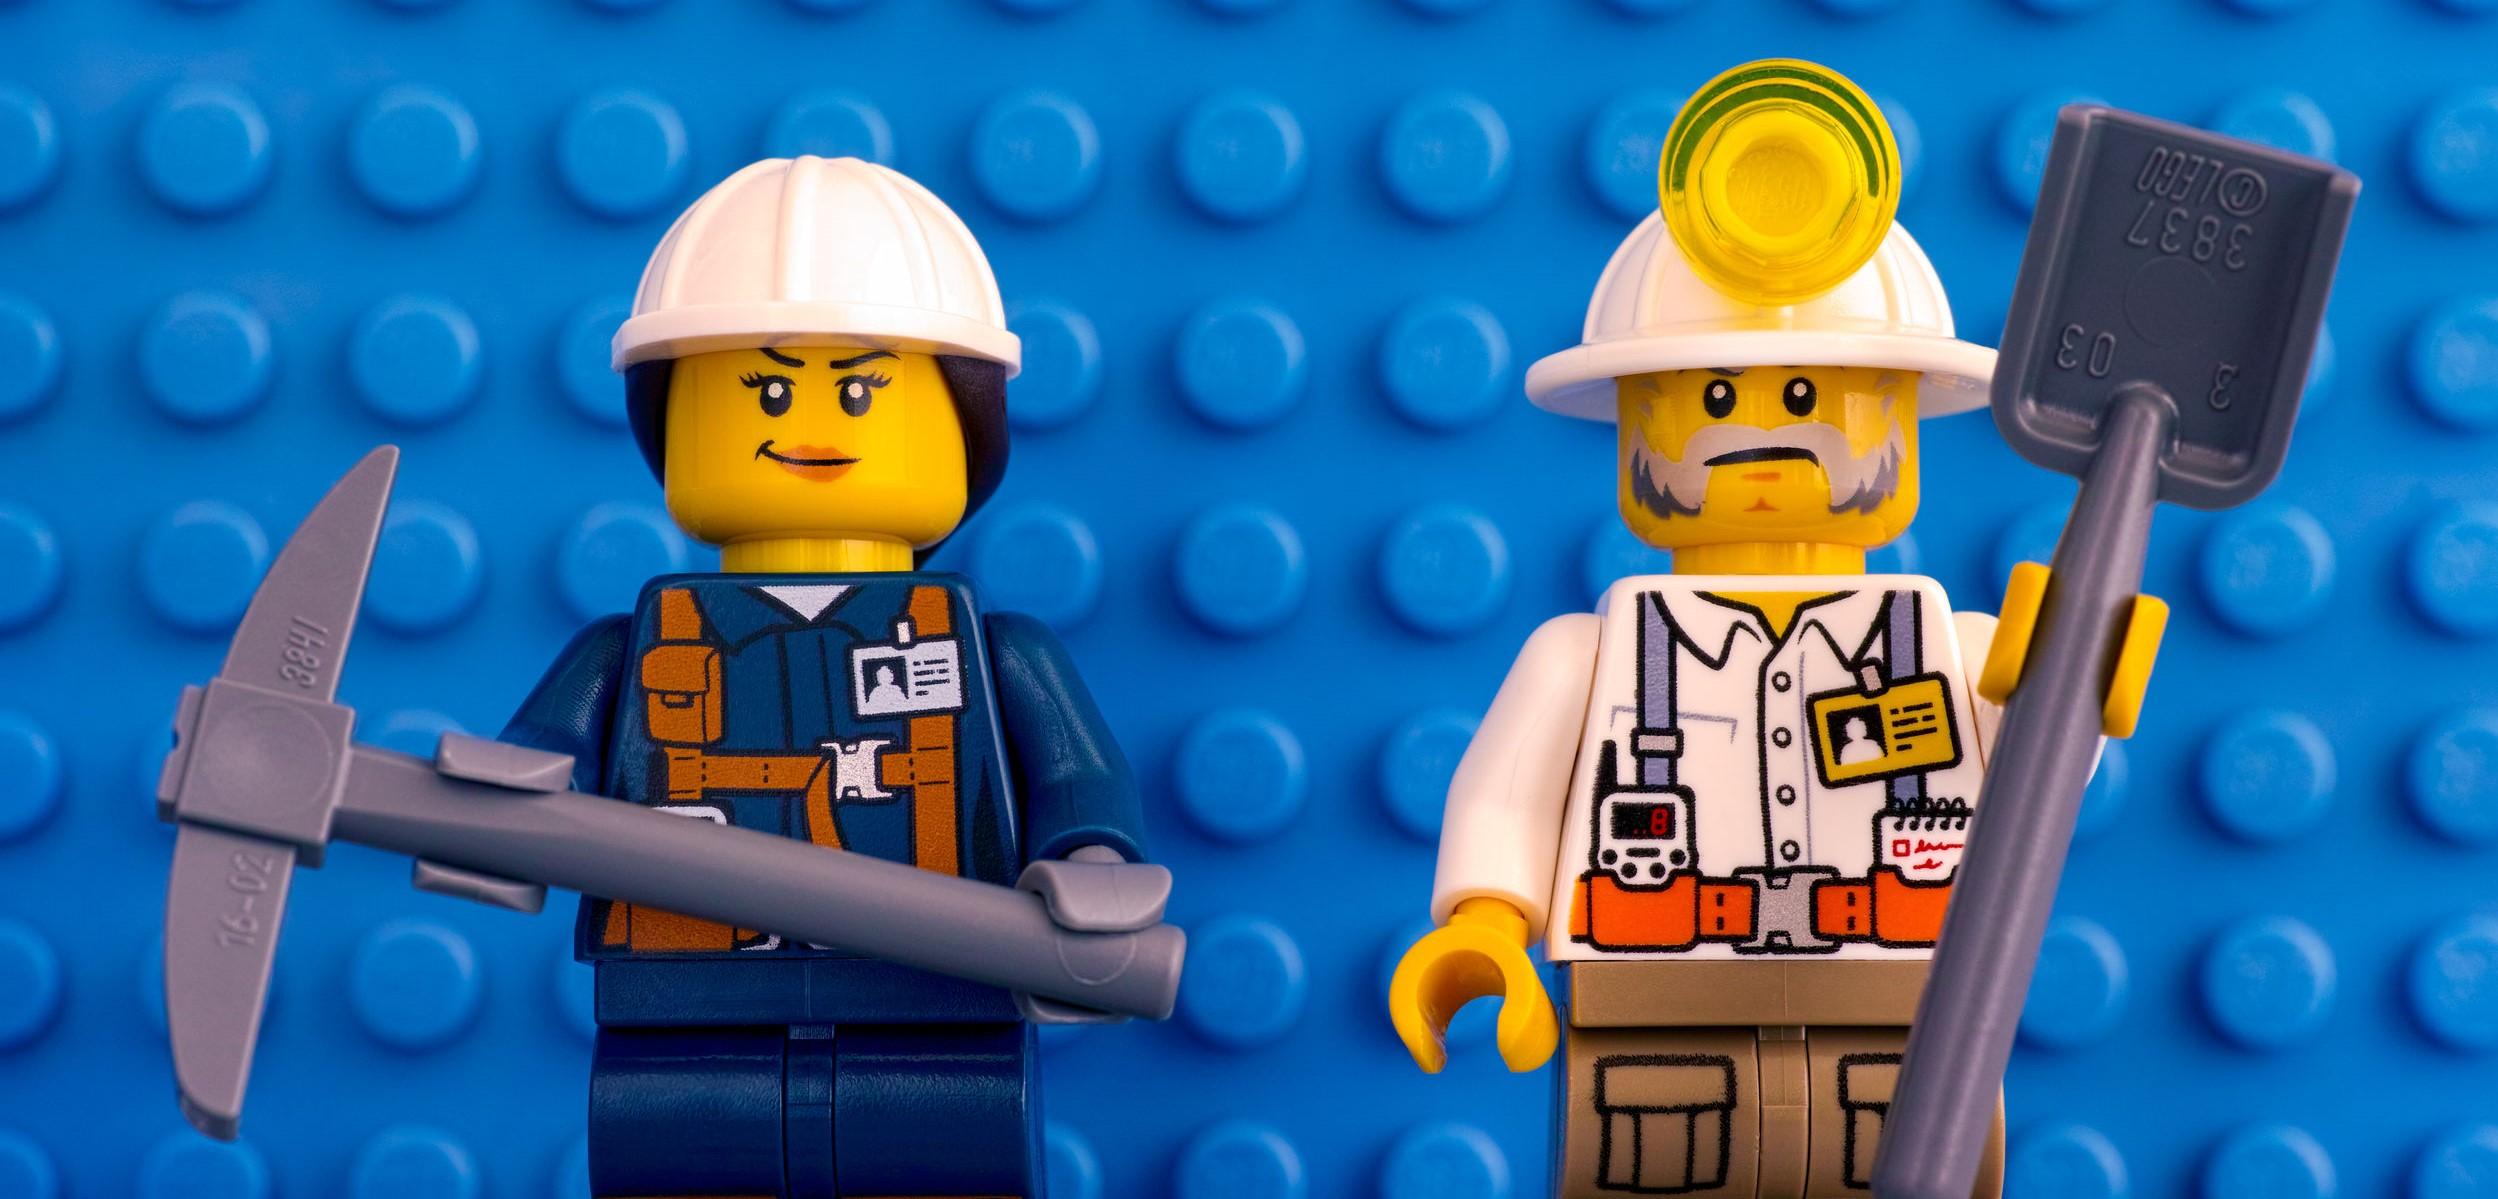 This picture shows two LEGO miners, who don't have much to do with fast weight loss, but look cool.